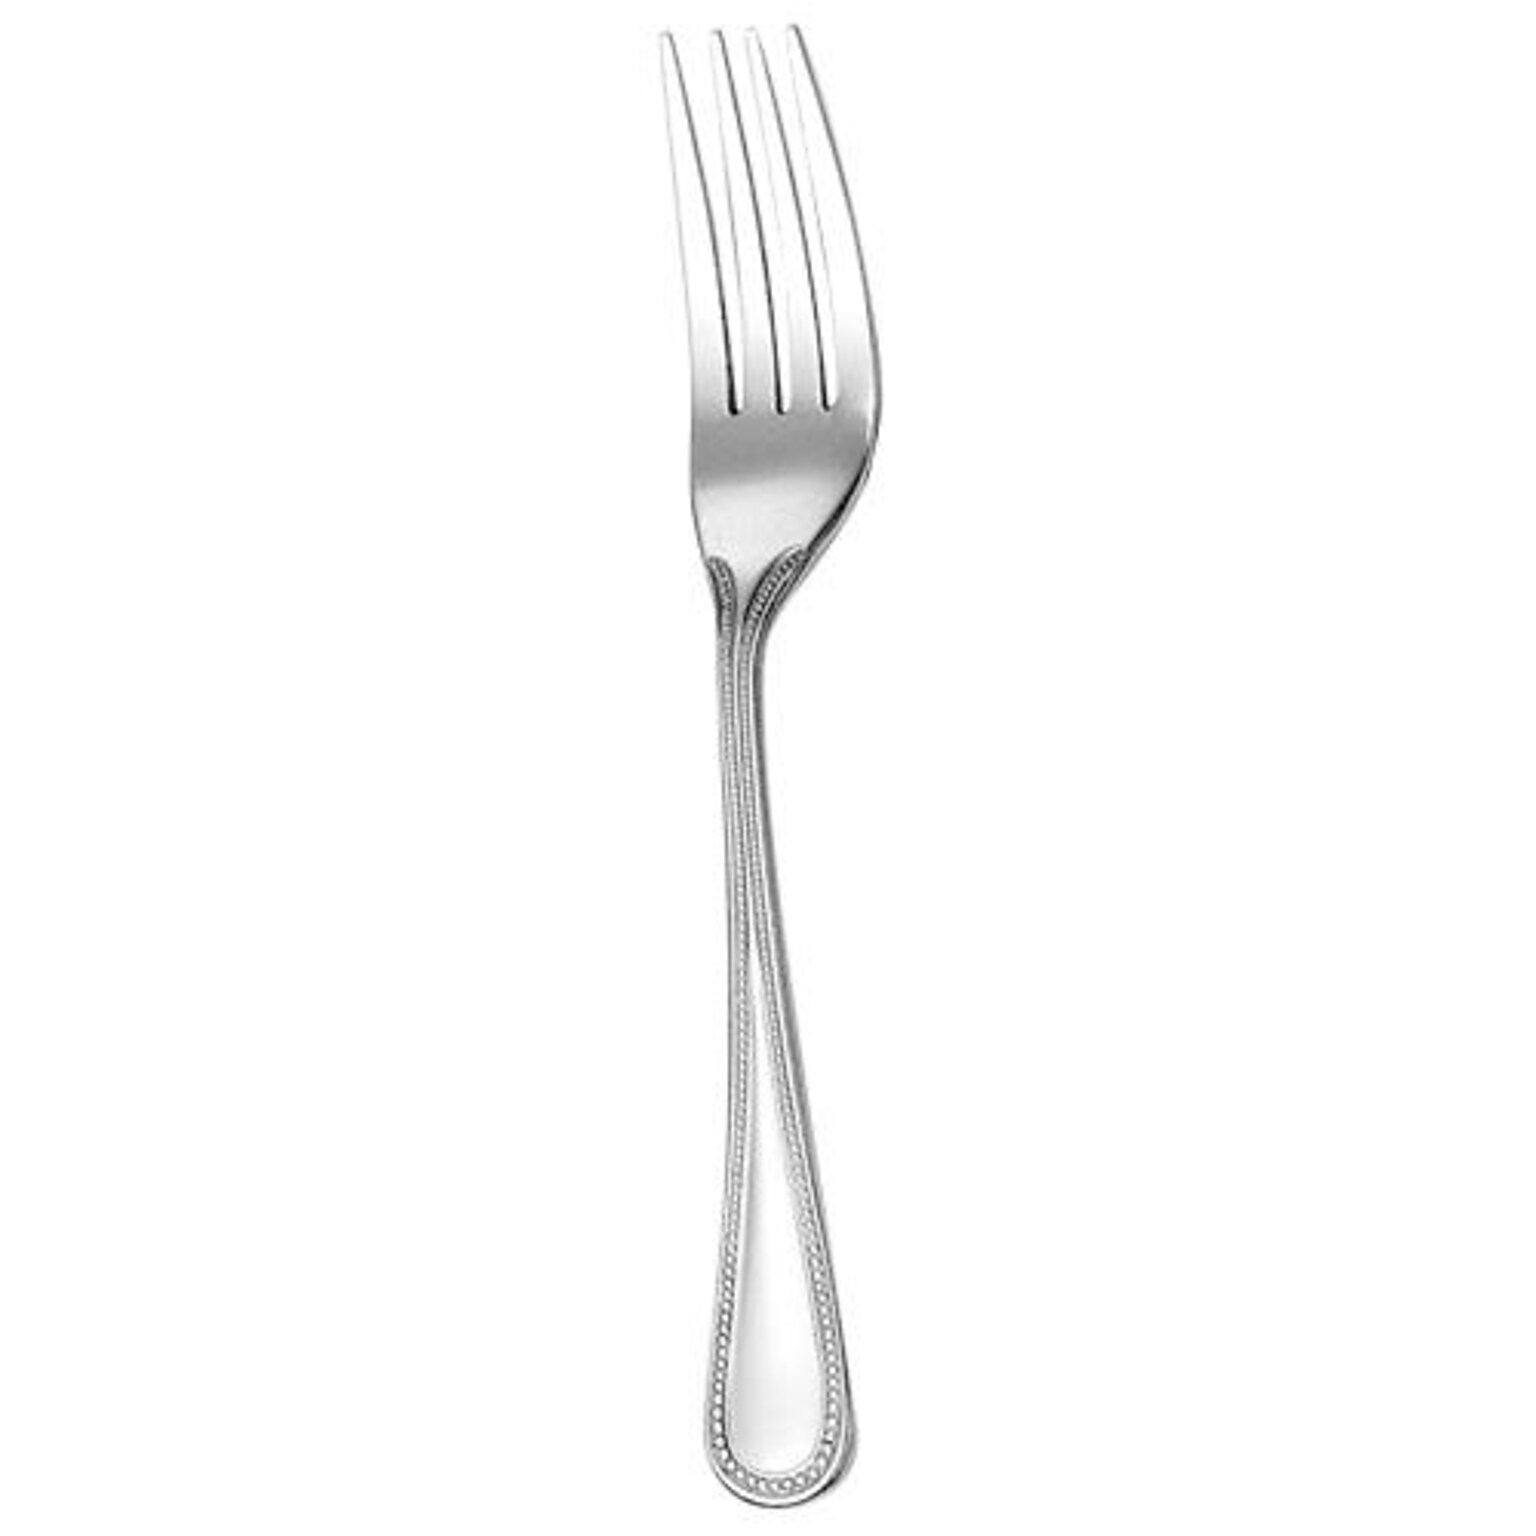 Walco Accolade 4505 Stainless Steel Dinner Forks, 24/Carton